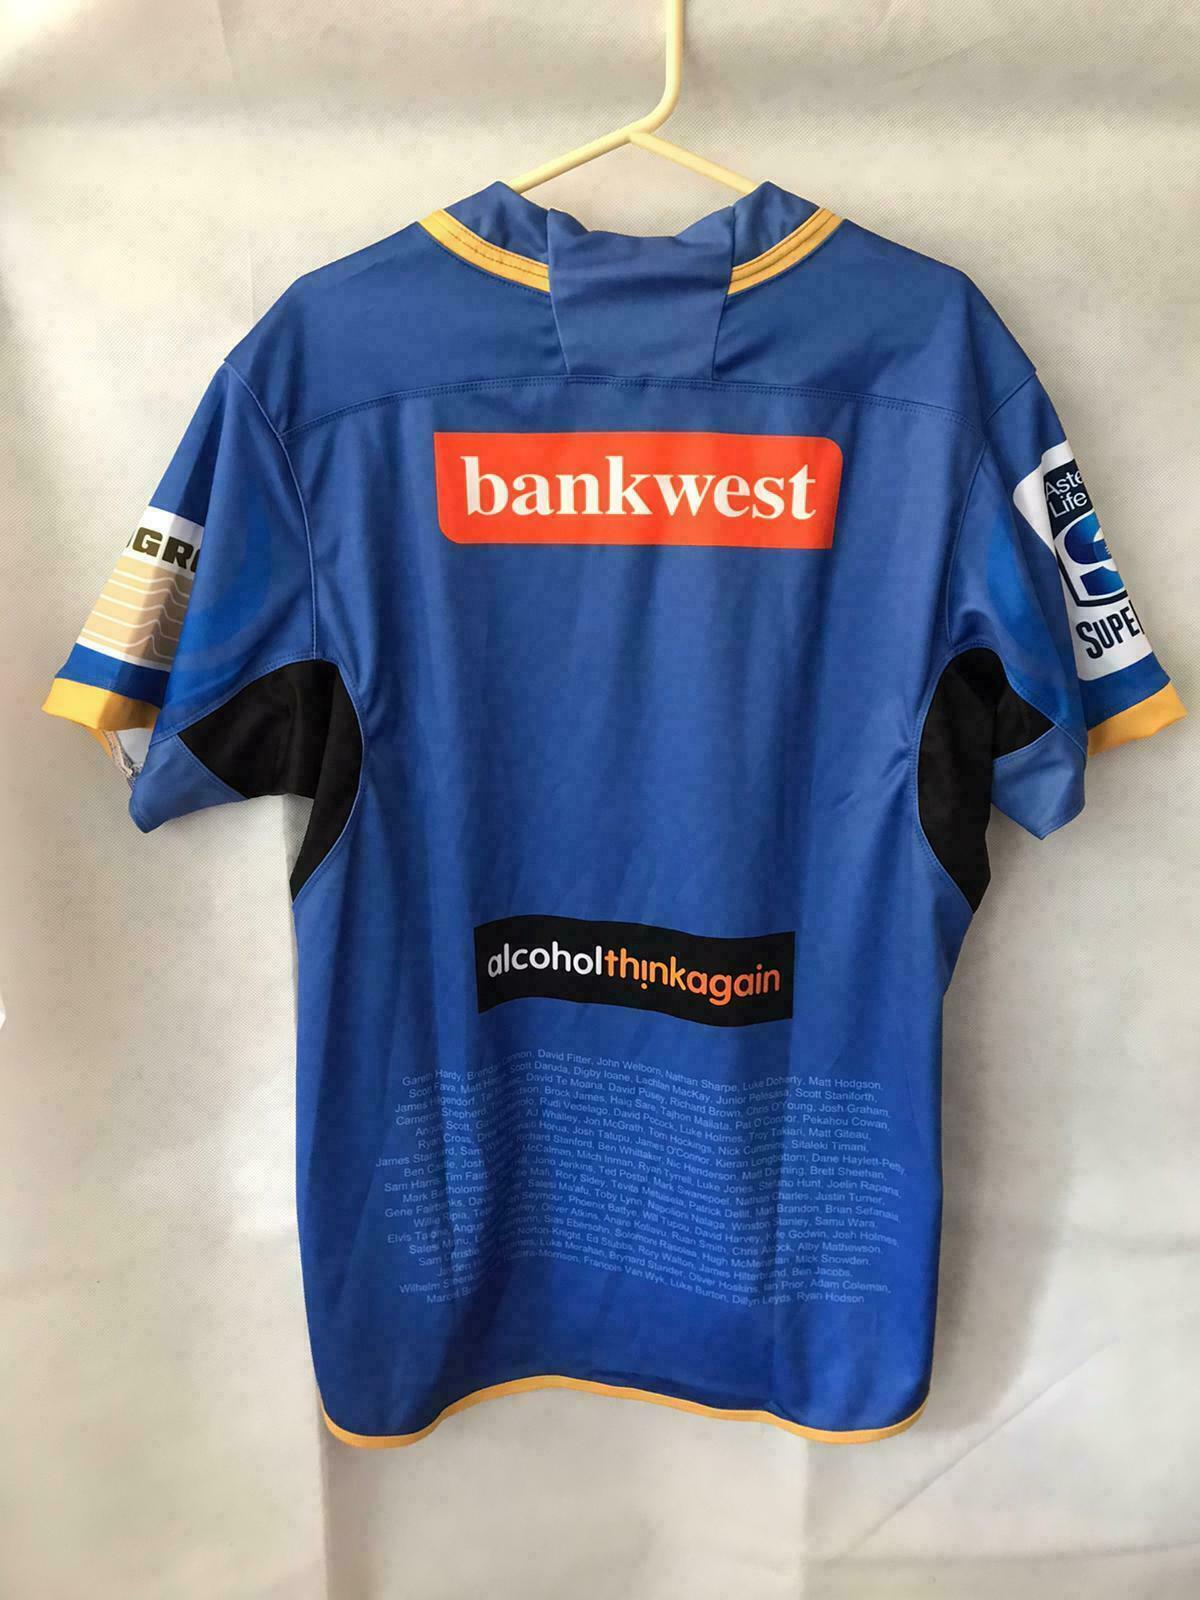 Western Force Rugby Shirt - 54" Chest - Brand New - Australian Rugby